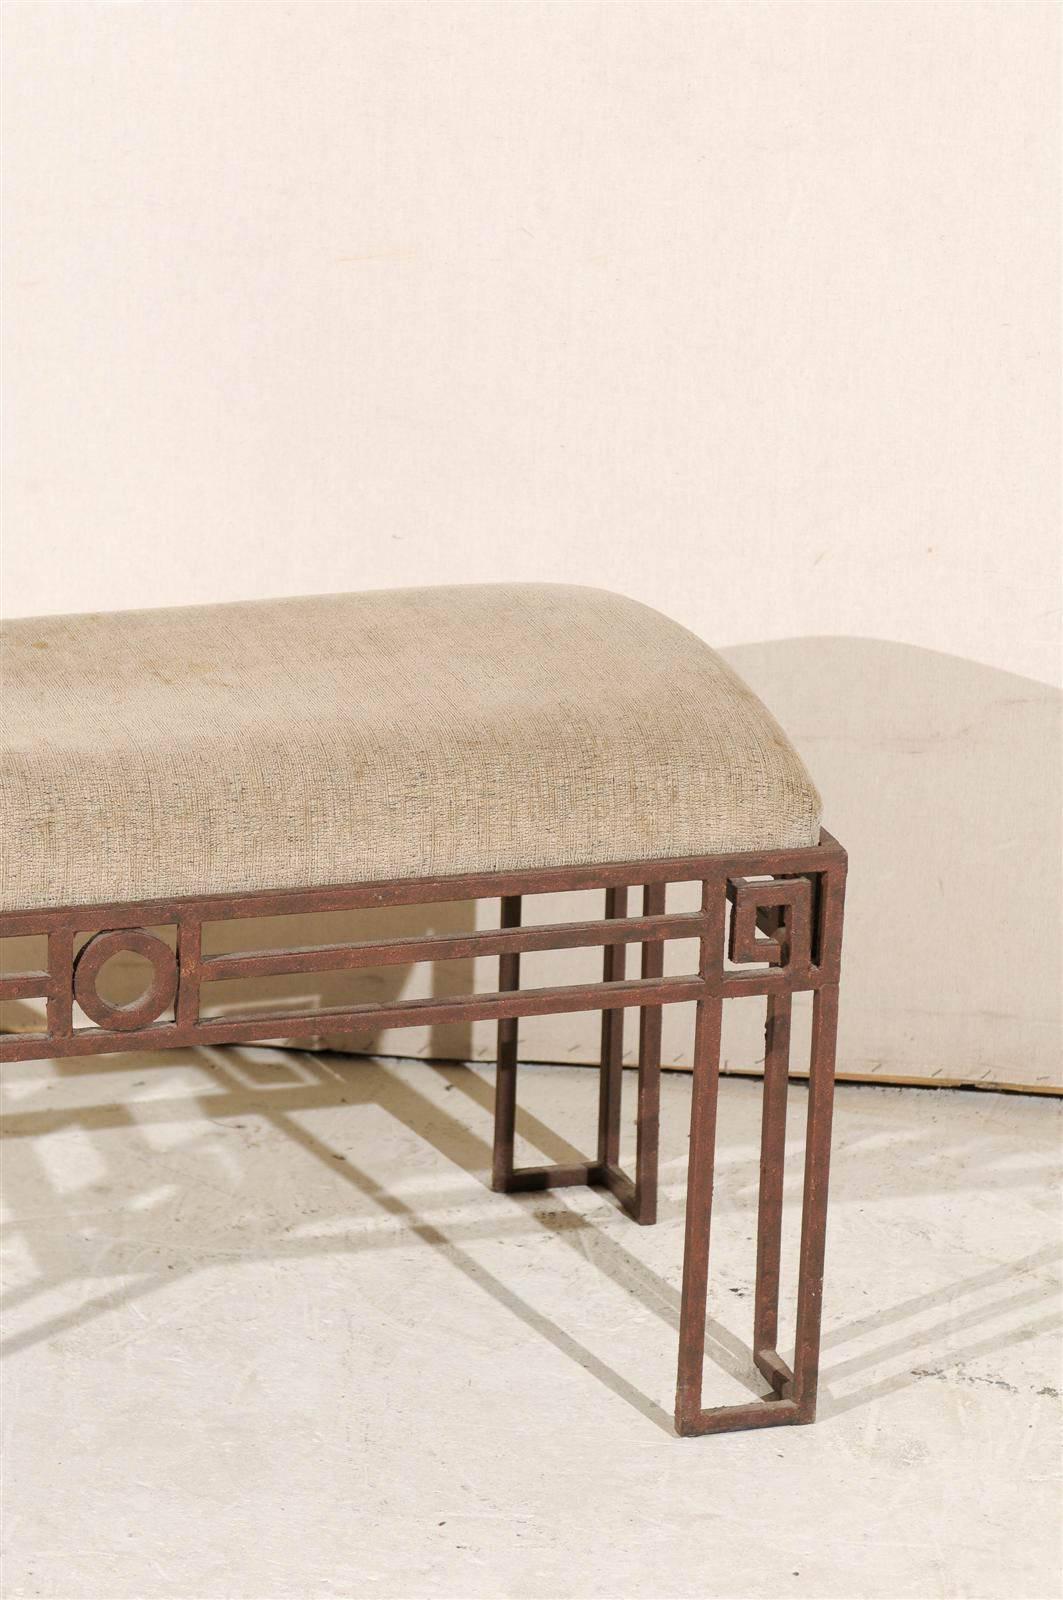 Iron Art Deco Style Geometrical Pattern Bench with Square and Circle Shapes, American